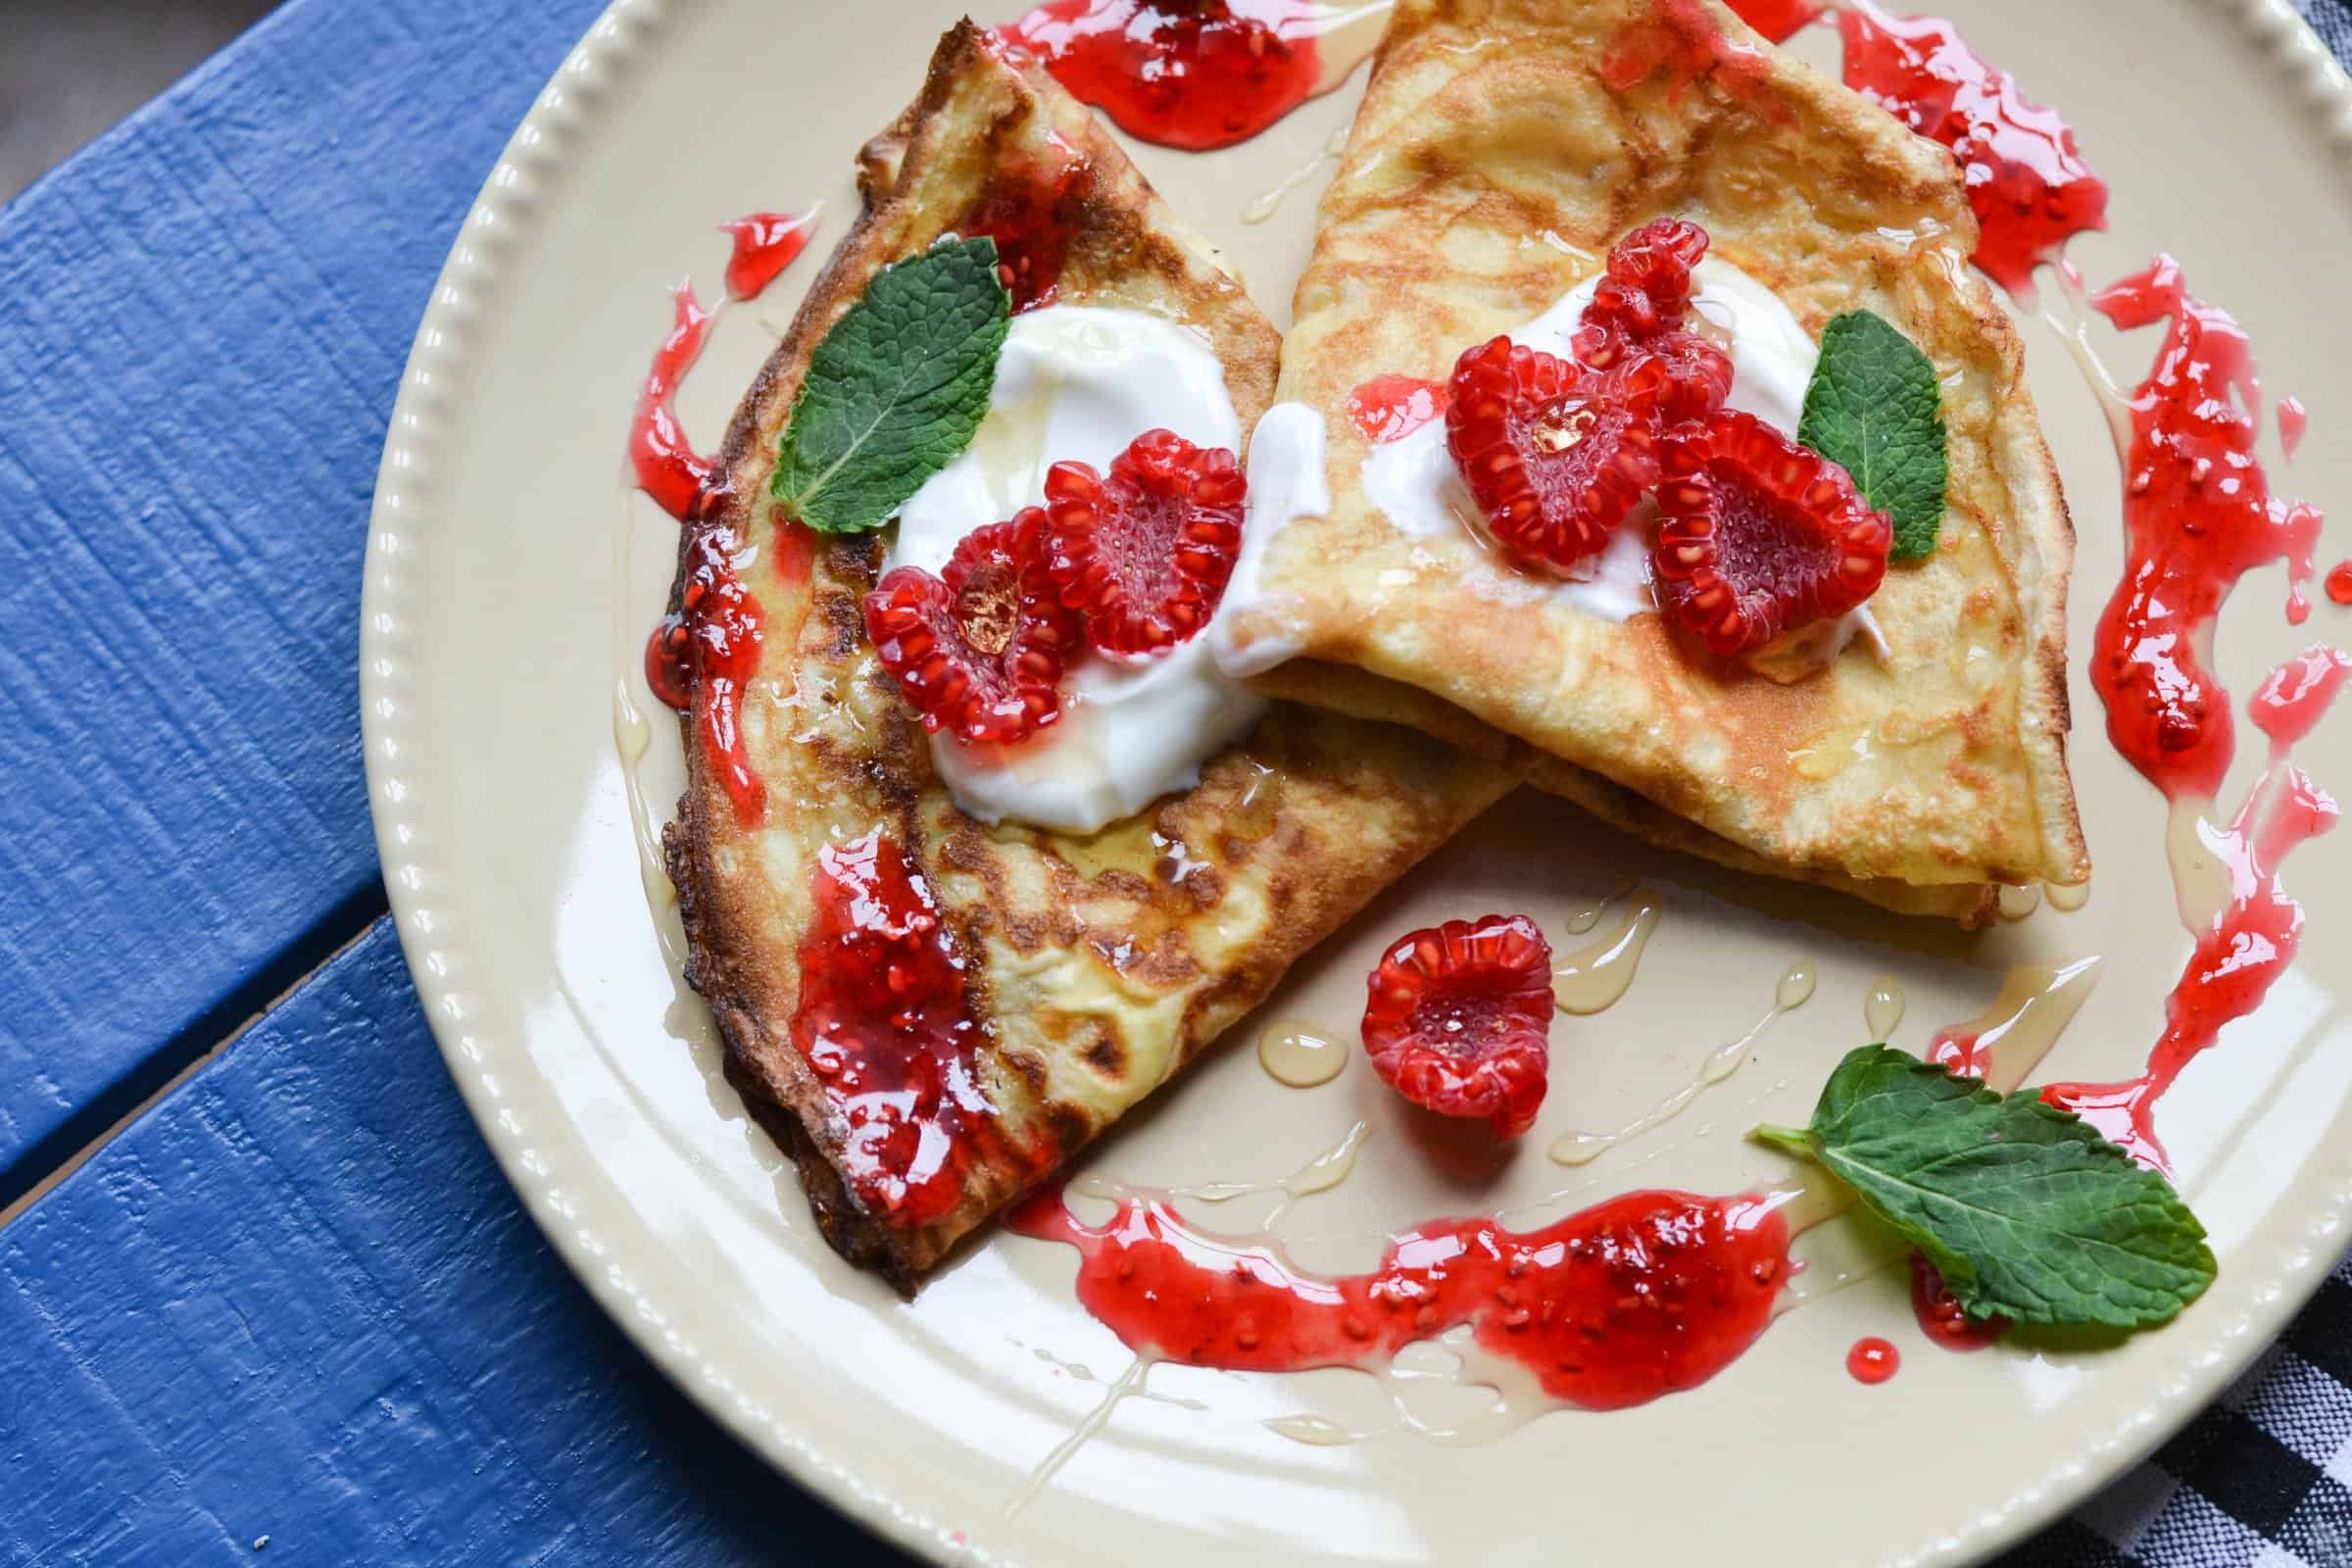 HiP Paris blog. A different kind of Christmas, Fruit crepes are appropriate no matter what the season.